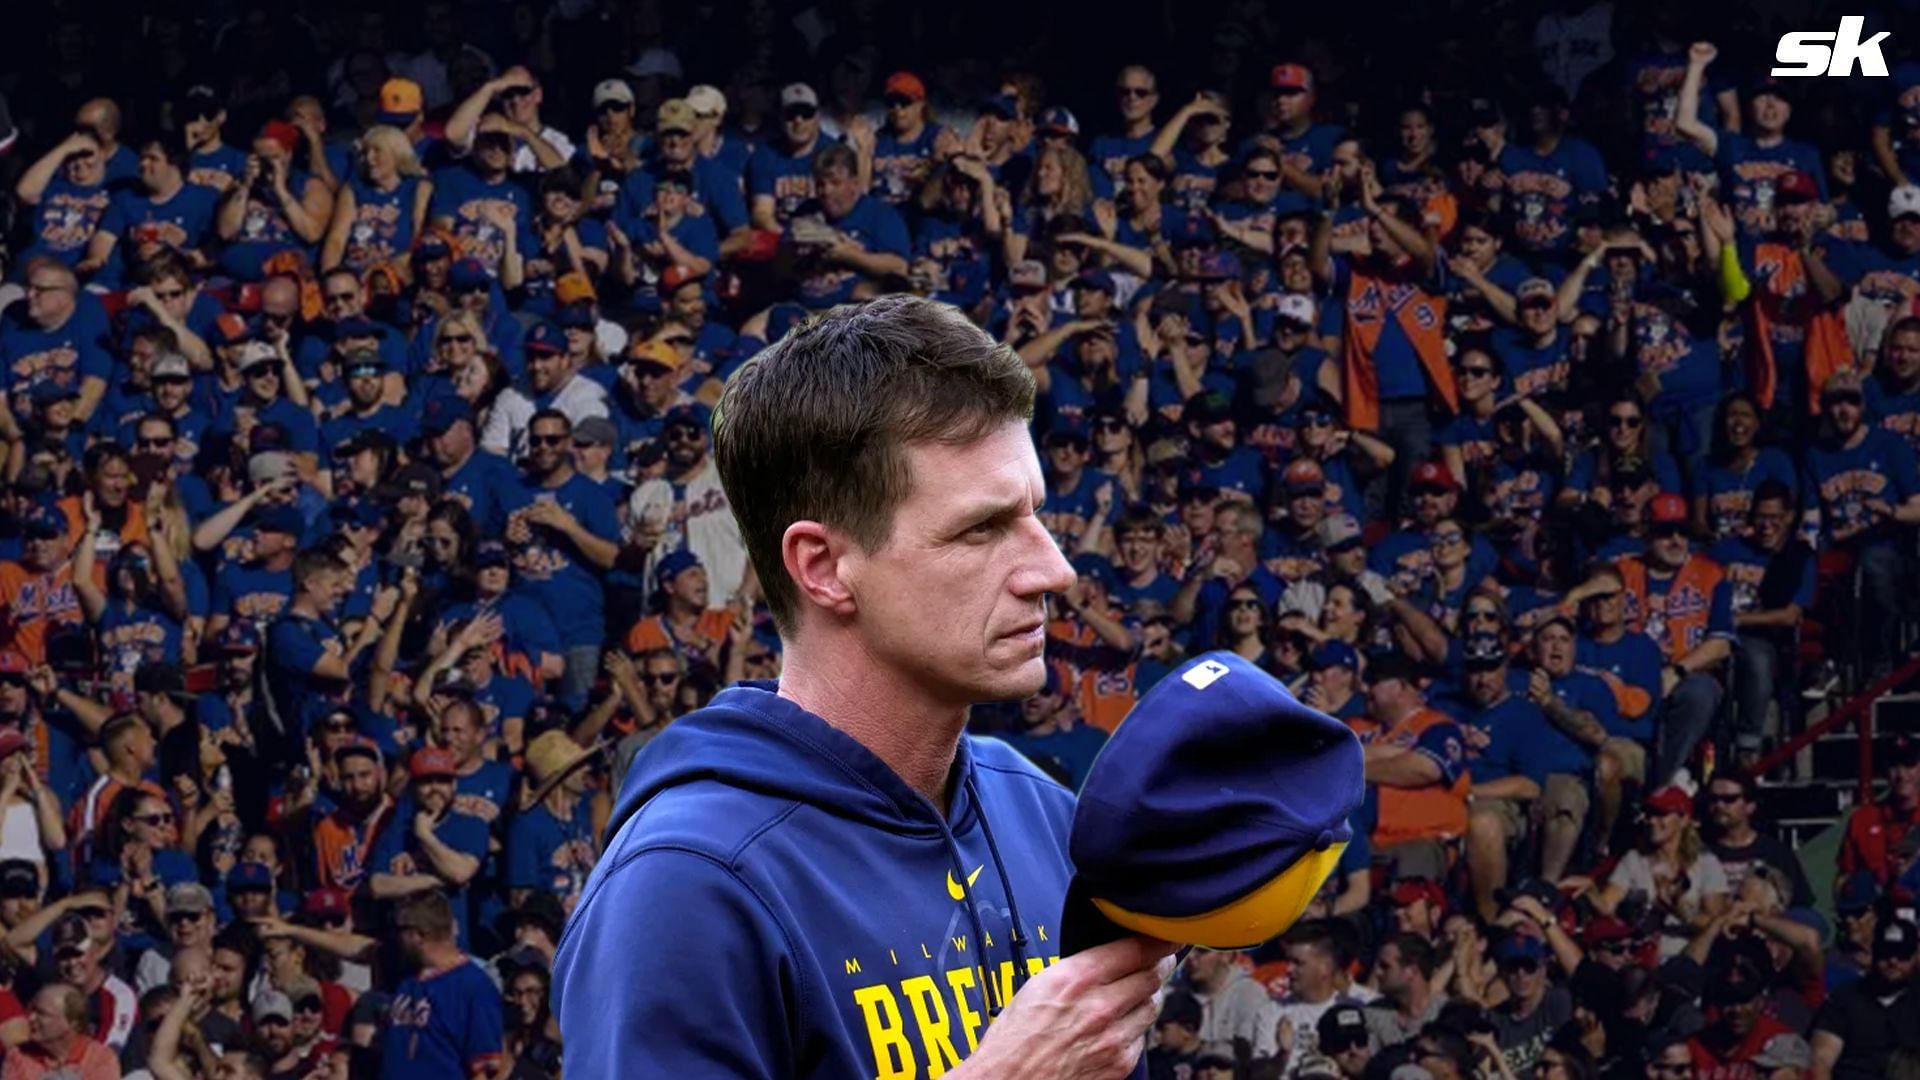 Mets fans not impressed with Brewers manager Craig Counsell reportedly interviewing for coaching spot